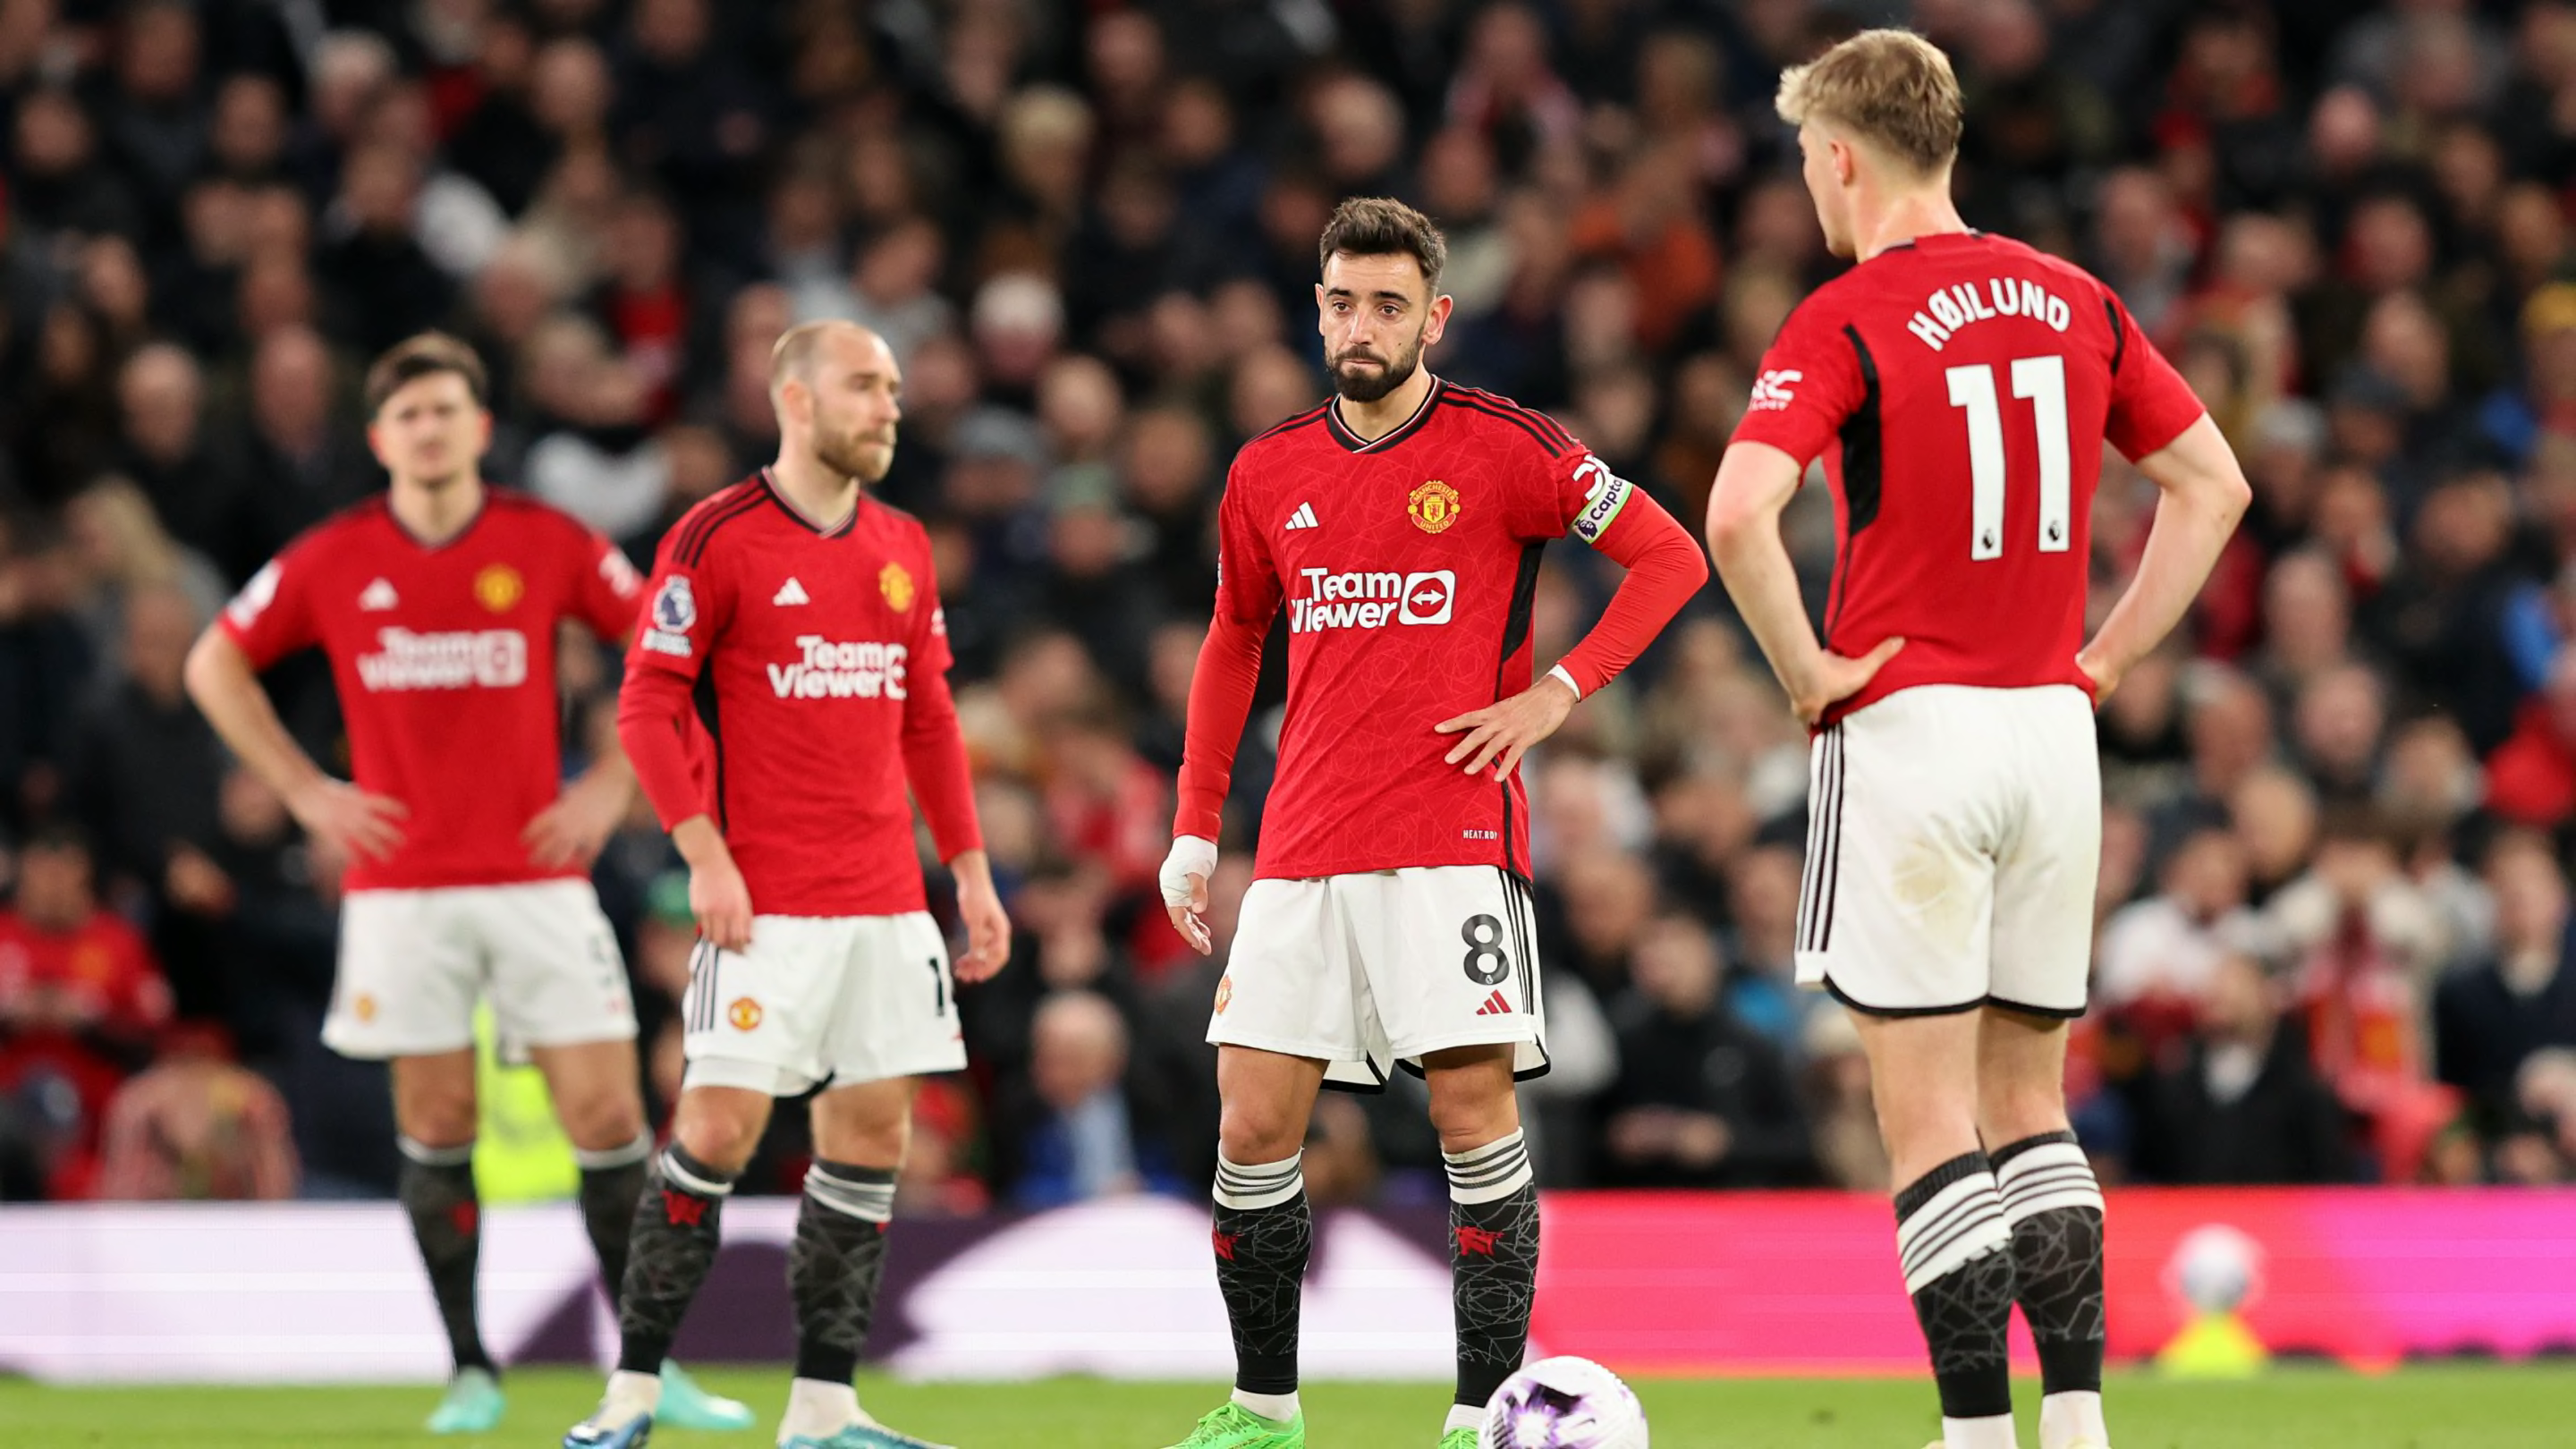 What is Man Utd's worst finish in Premier League history?